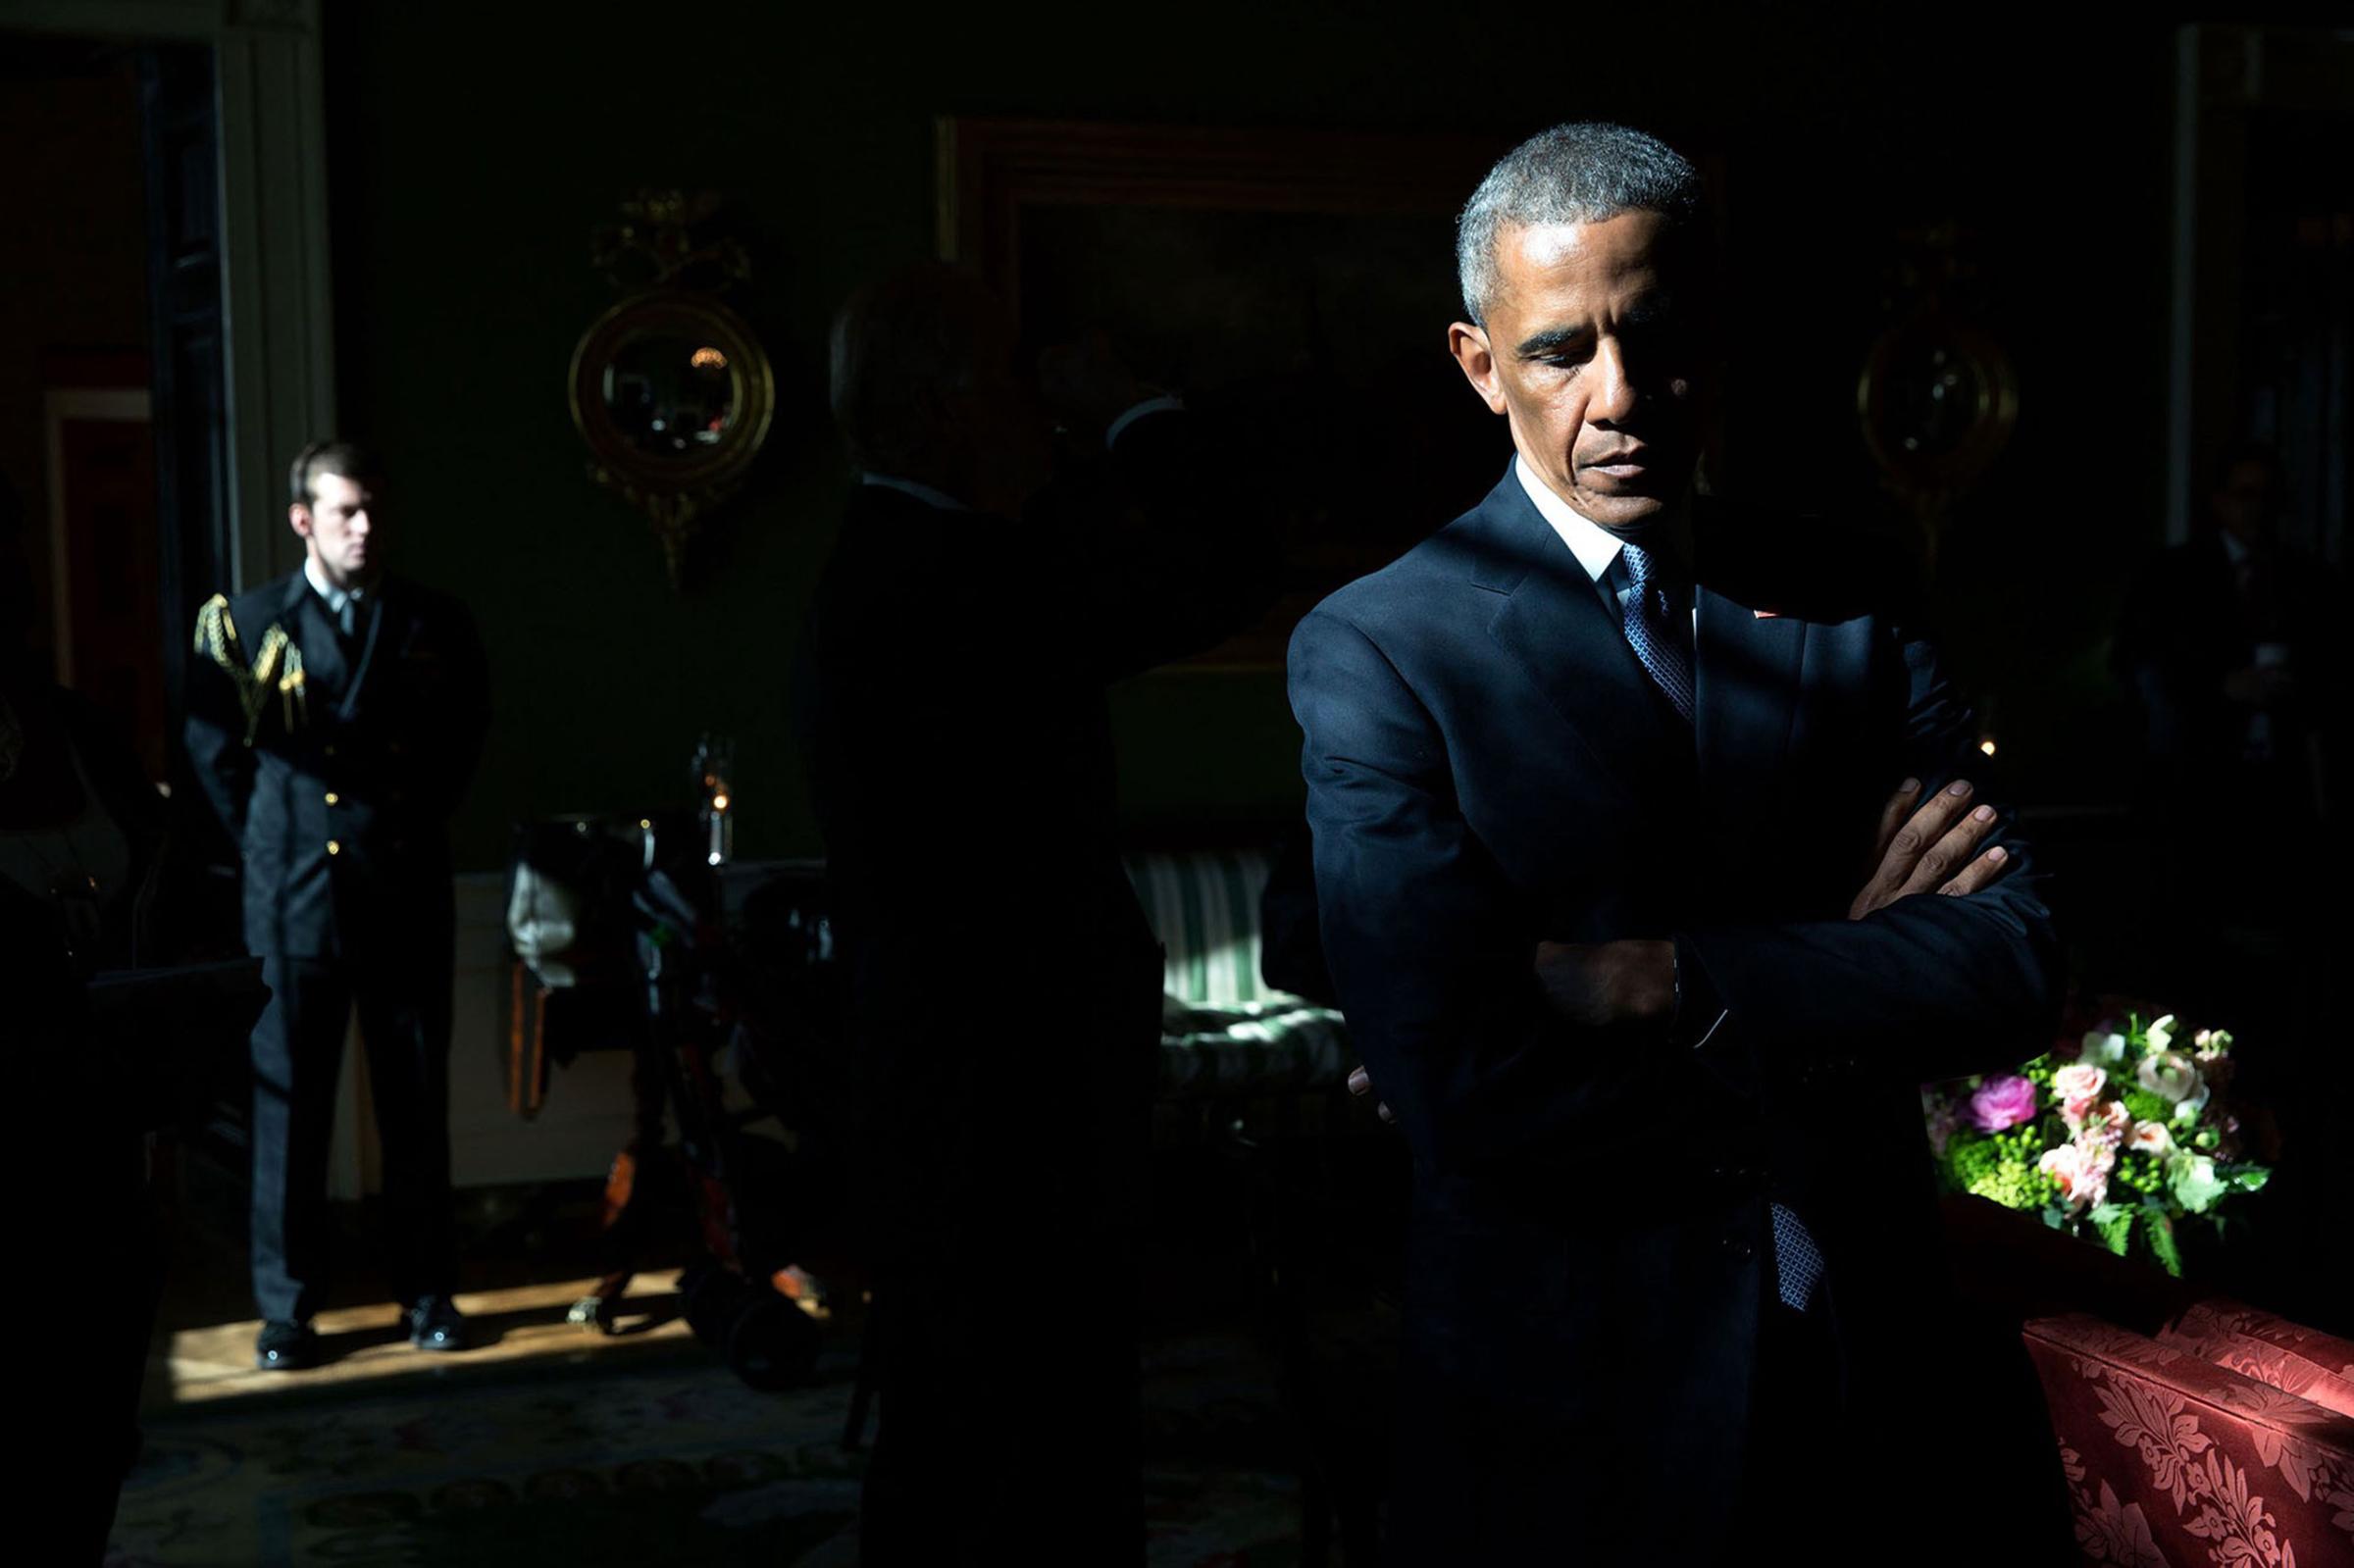 “With sunlight streaming through a window in the Green Room, President Obama listens to his introduction by Mark Barden, whose 7-year-old son Daniel was killed during the 2012 shooting at Sandy Hook Elementary School in Newtown, Conn. Later, as he made remarks in the East Room, he began to cry as he recalled the day of the shootings; he called it the worst day of his Presidency, Jan. 5, 2016.”